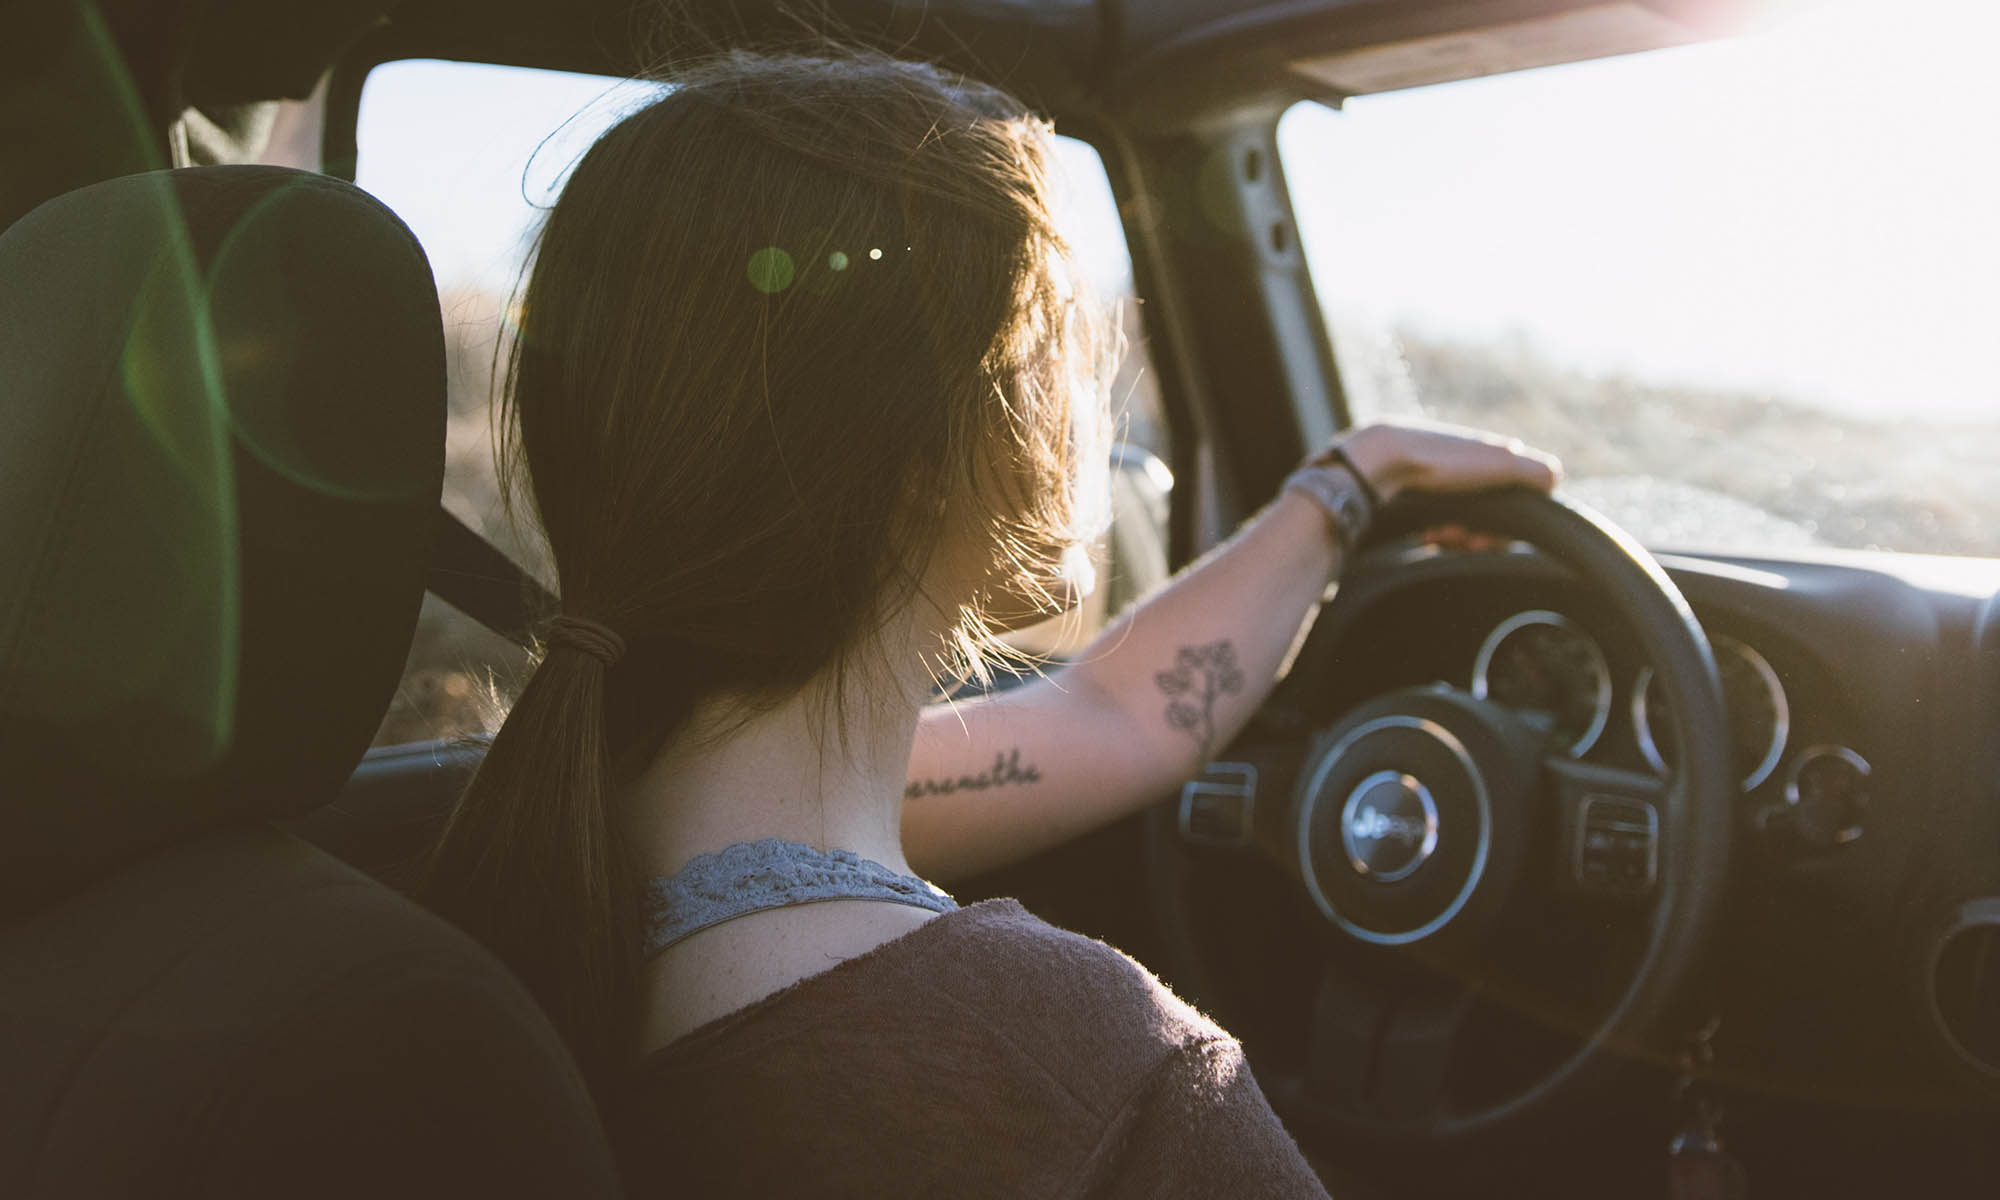 A (woman’s) guide to staying safe on the road